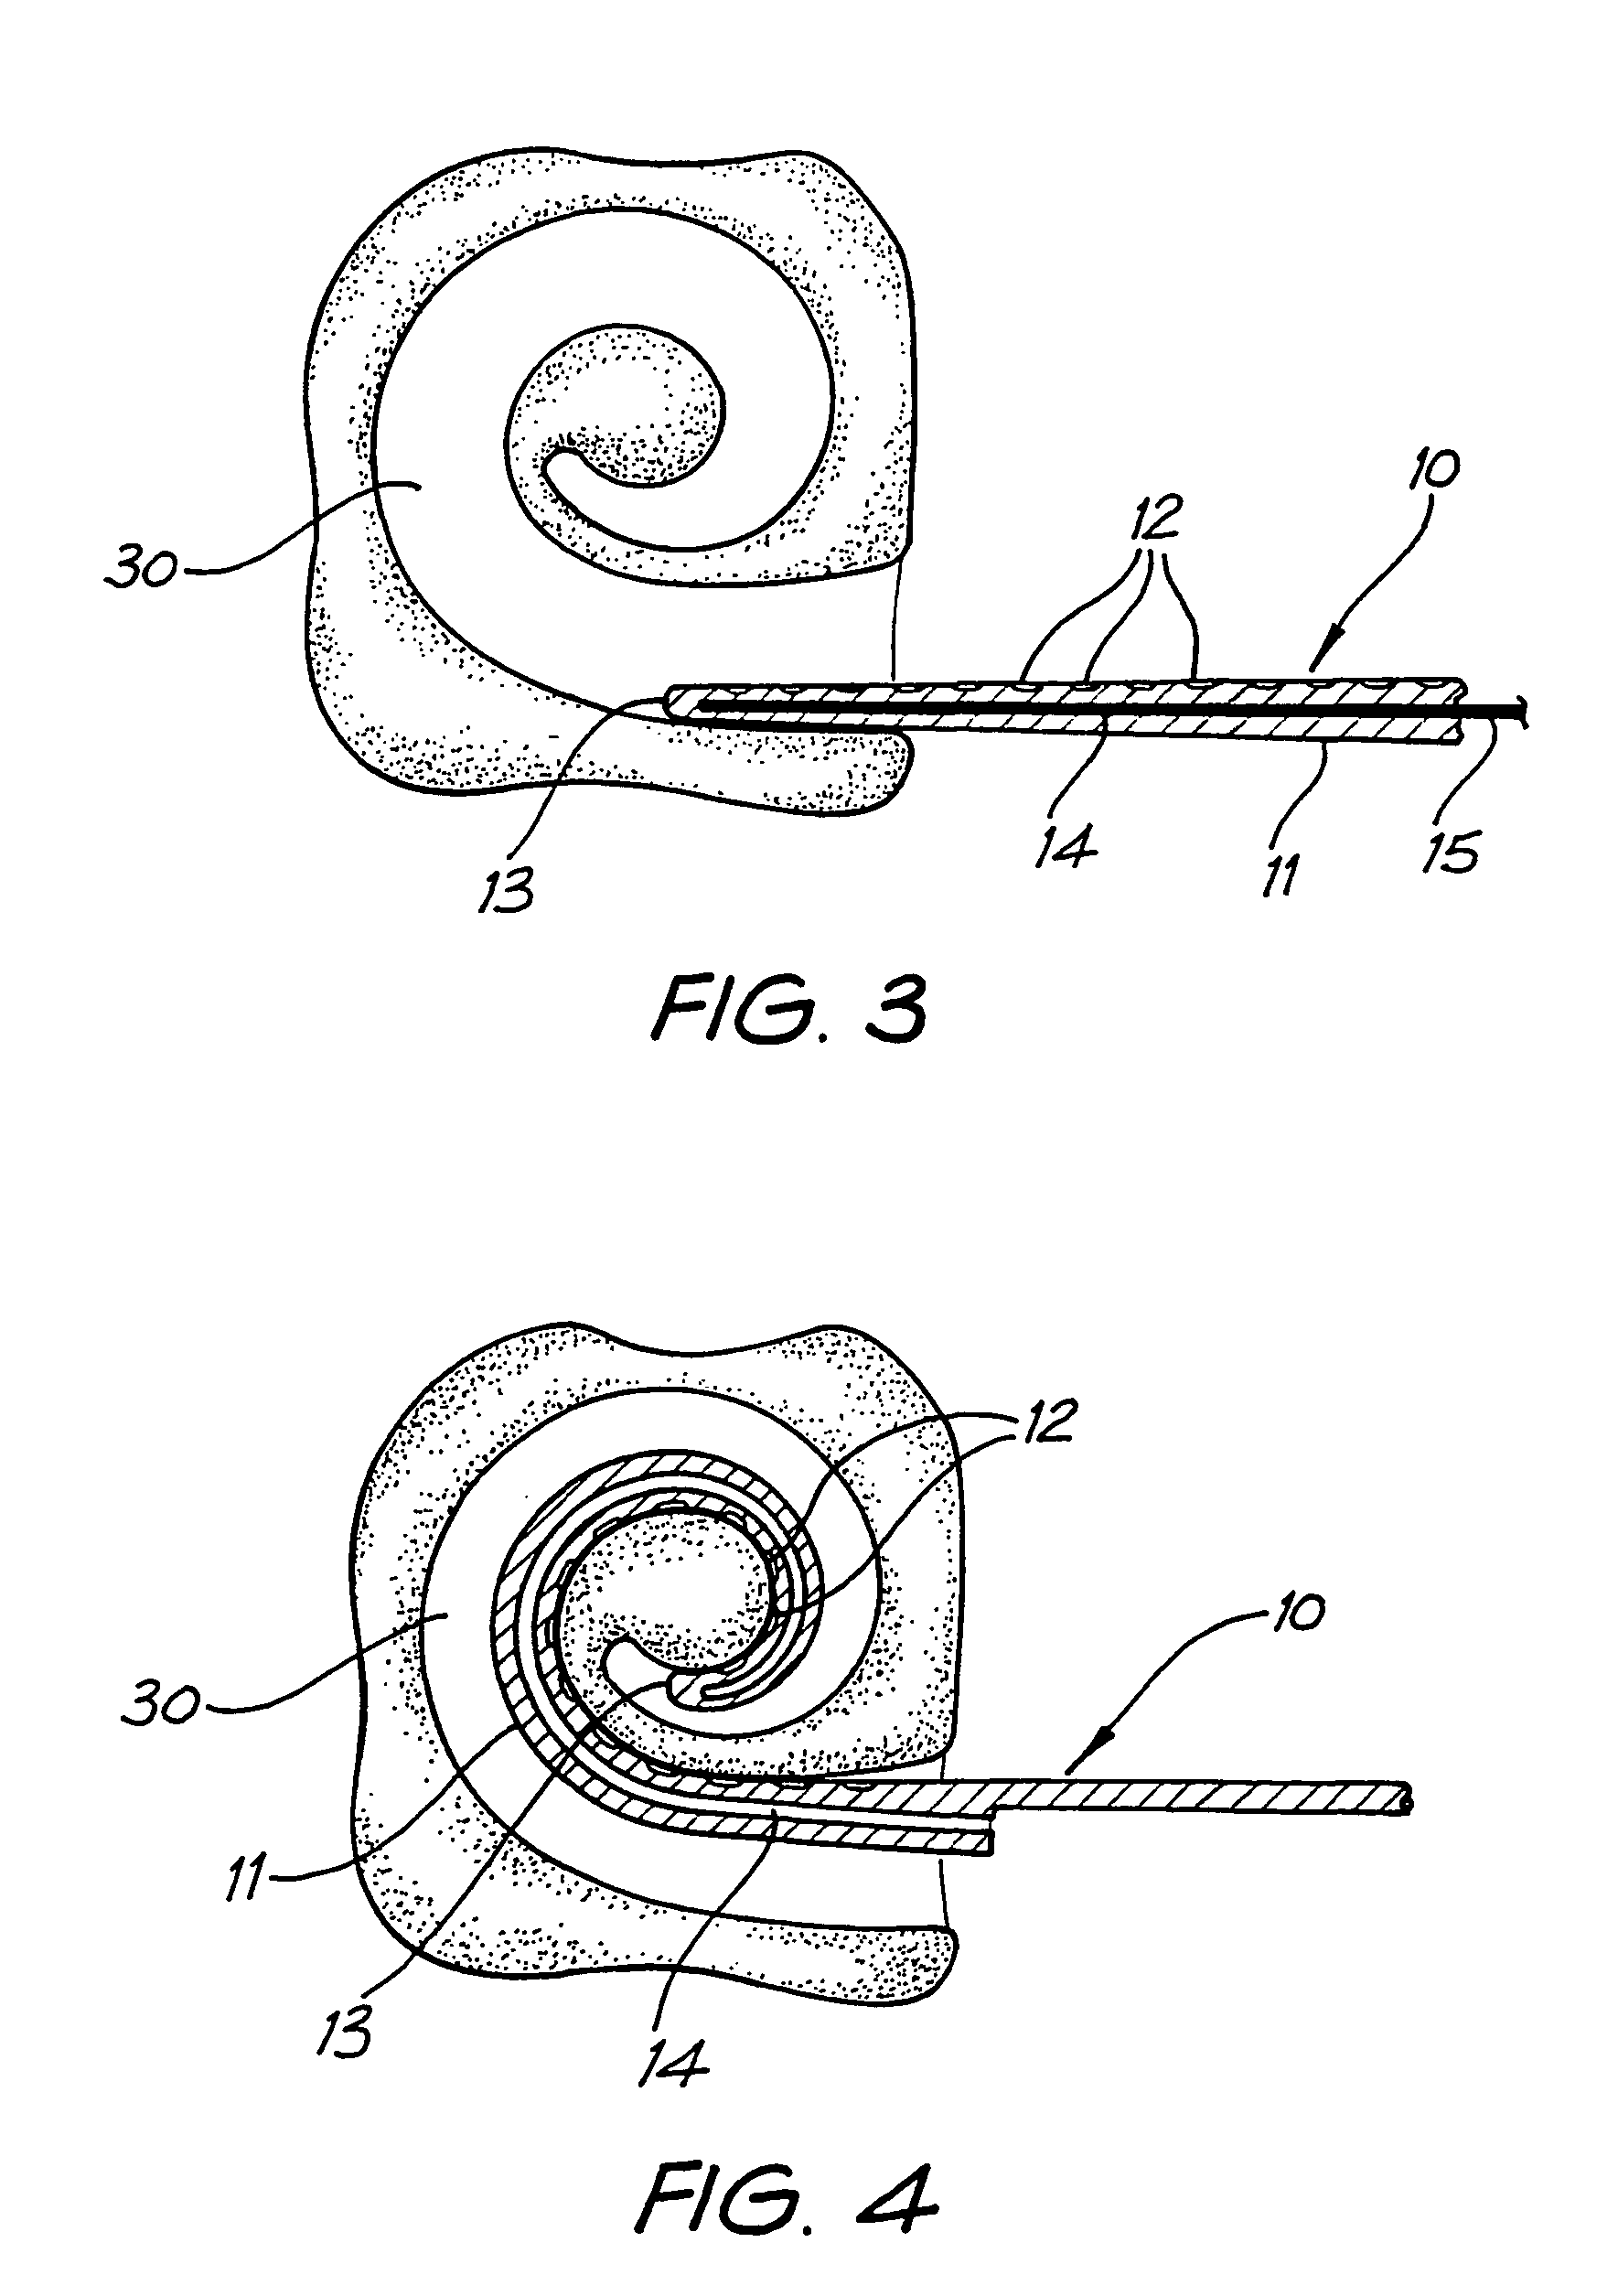 Cochlear implant electrode array